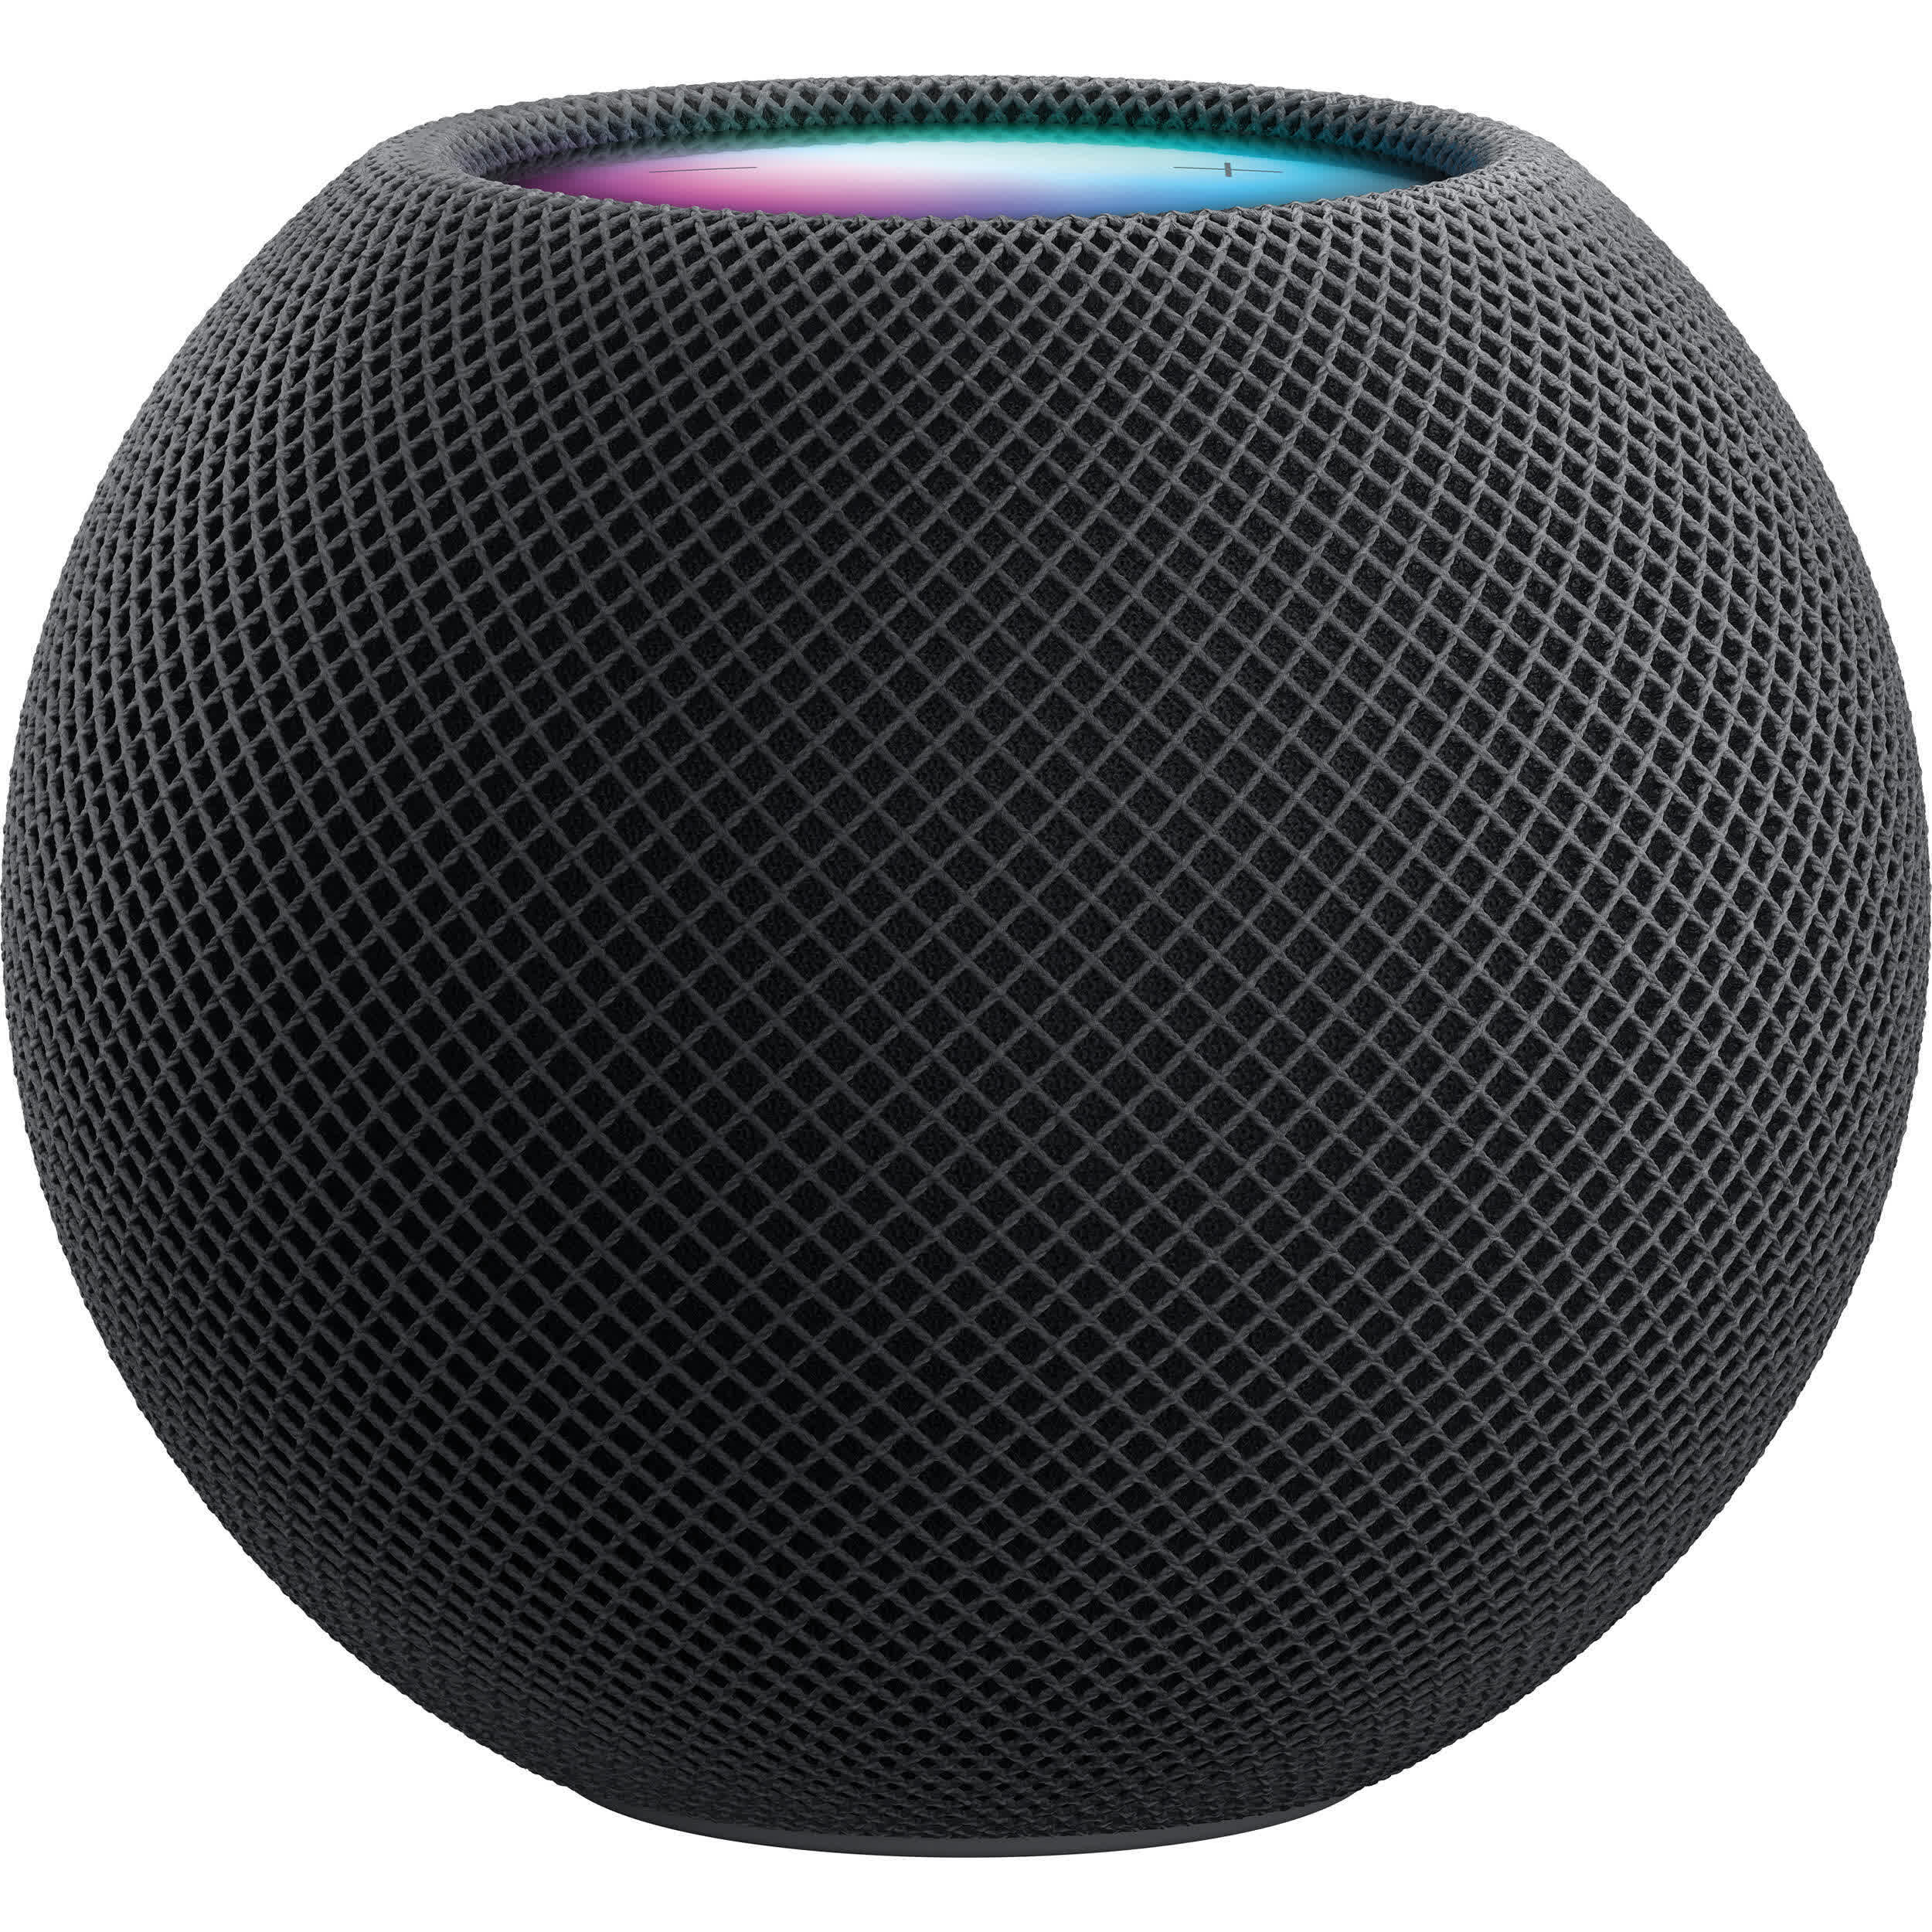 Apple HomePod Mini Reviews, Pros and Cons | TechSpot